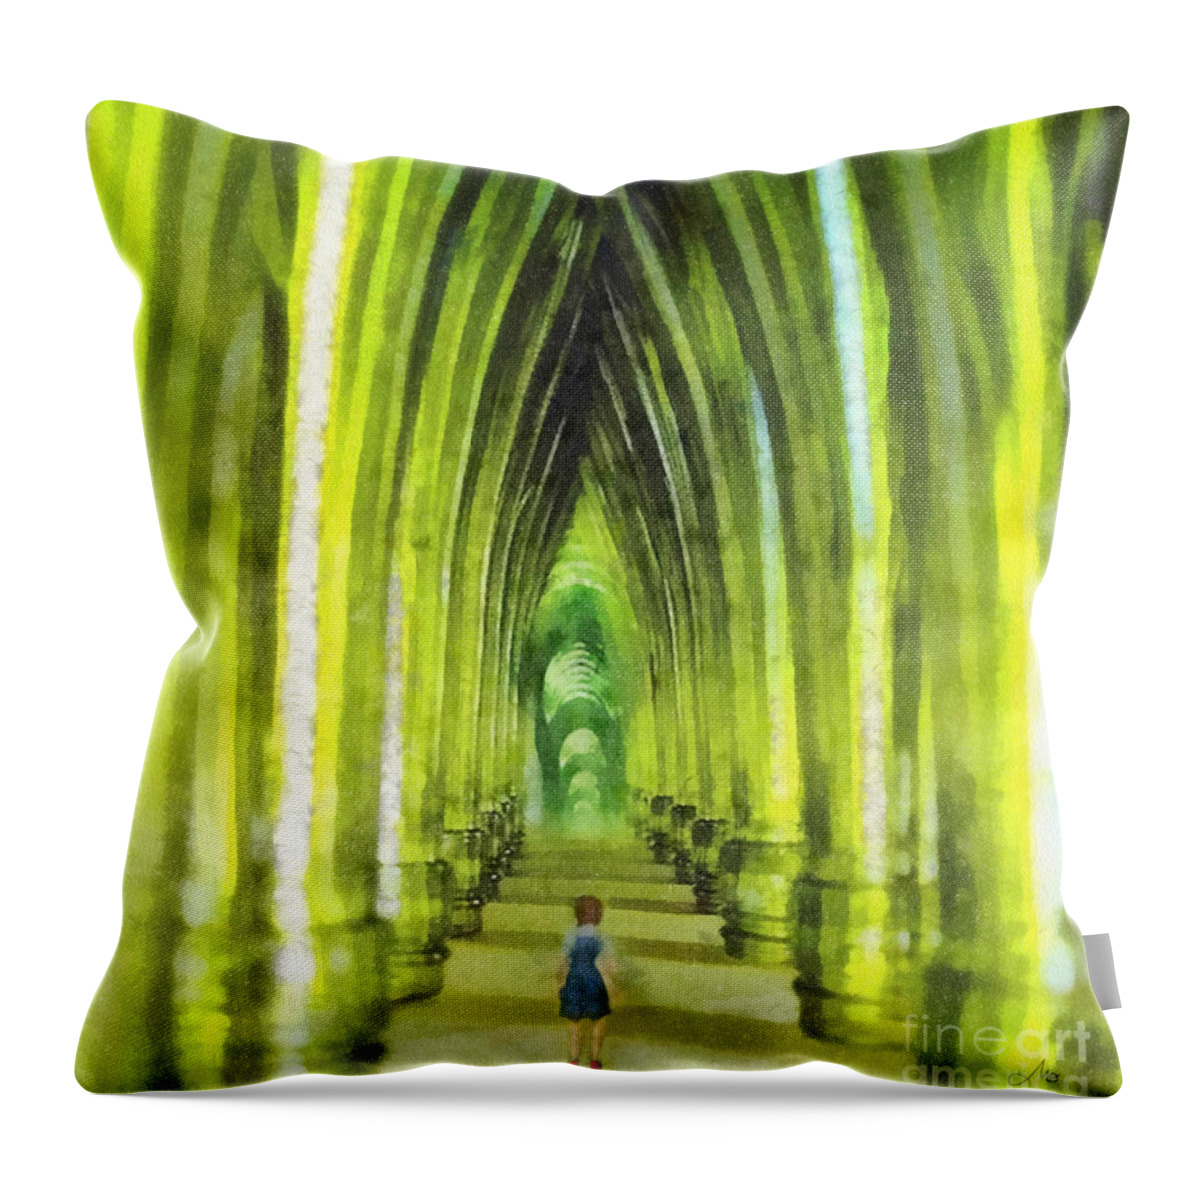 Visiting Emerald City Throw Pillow featuring the painting Visiting Emerald City by Mo T